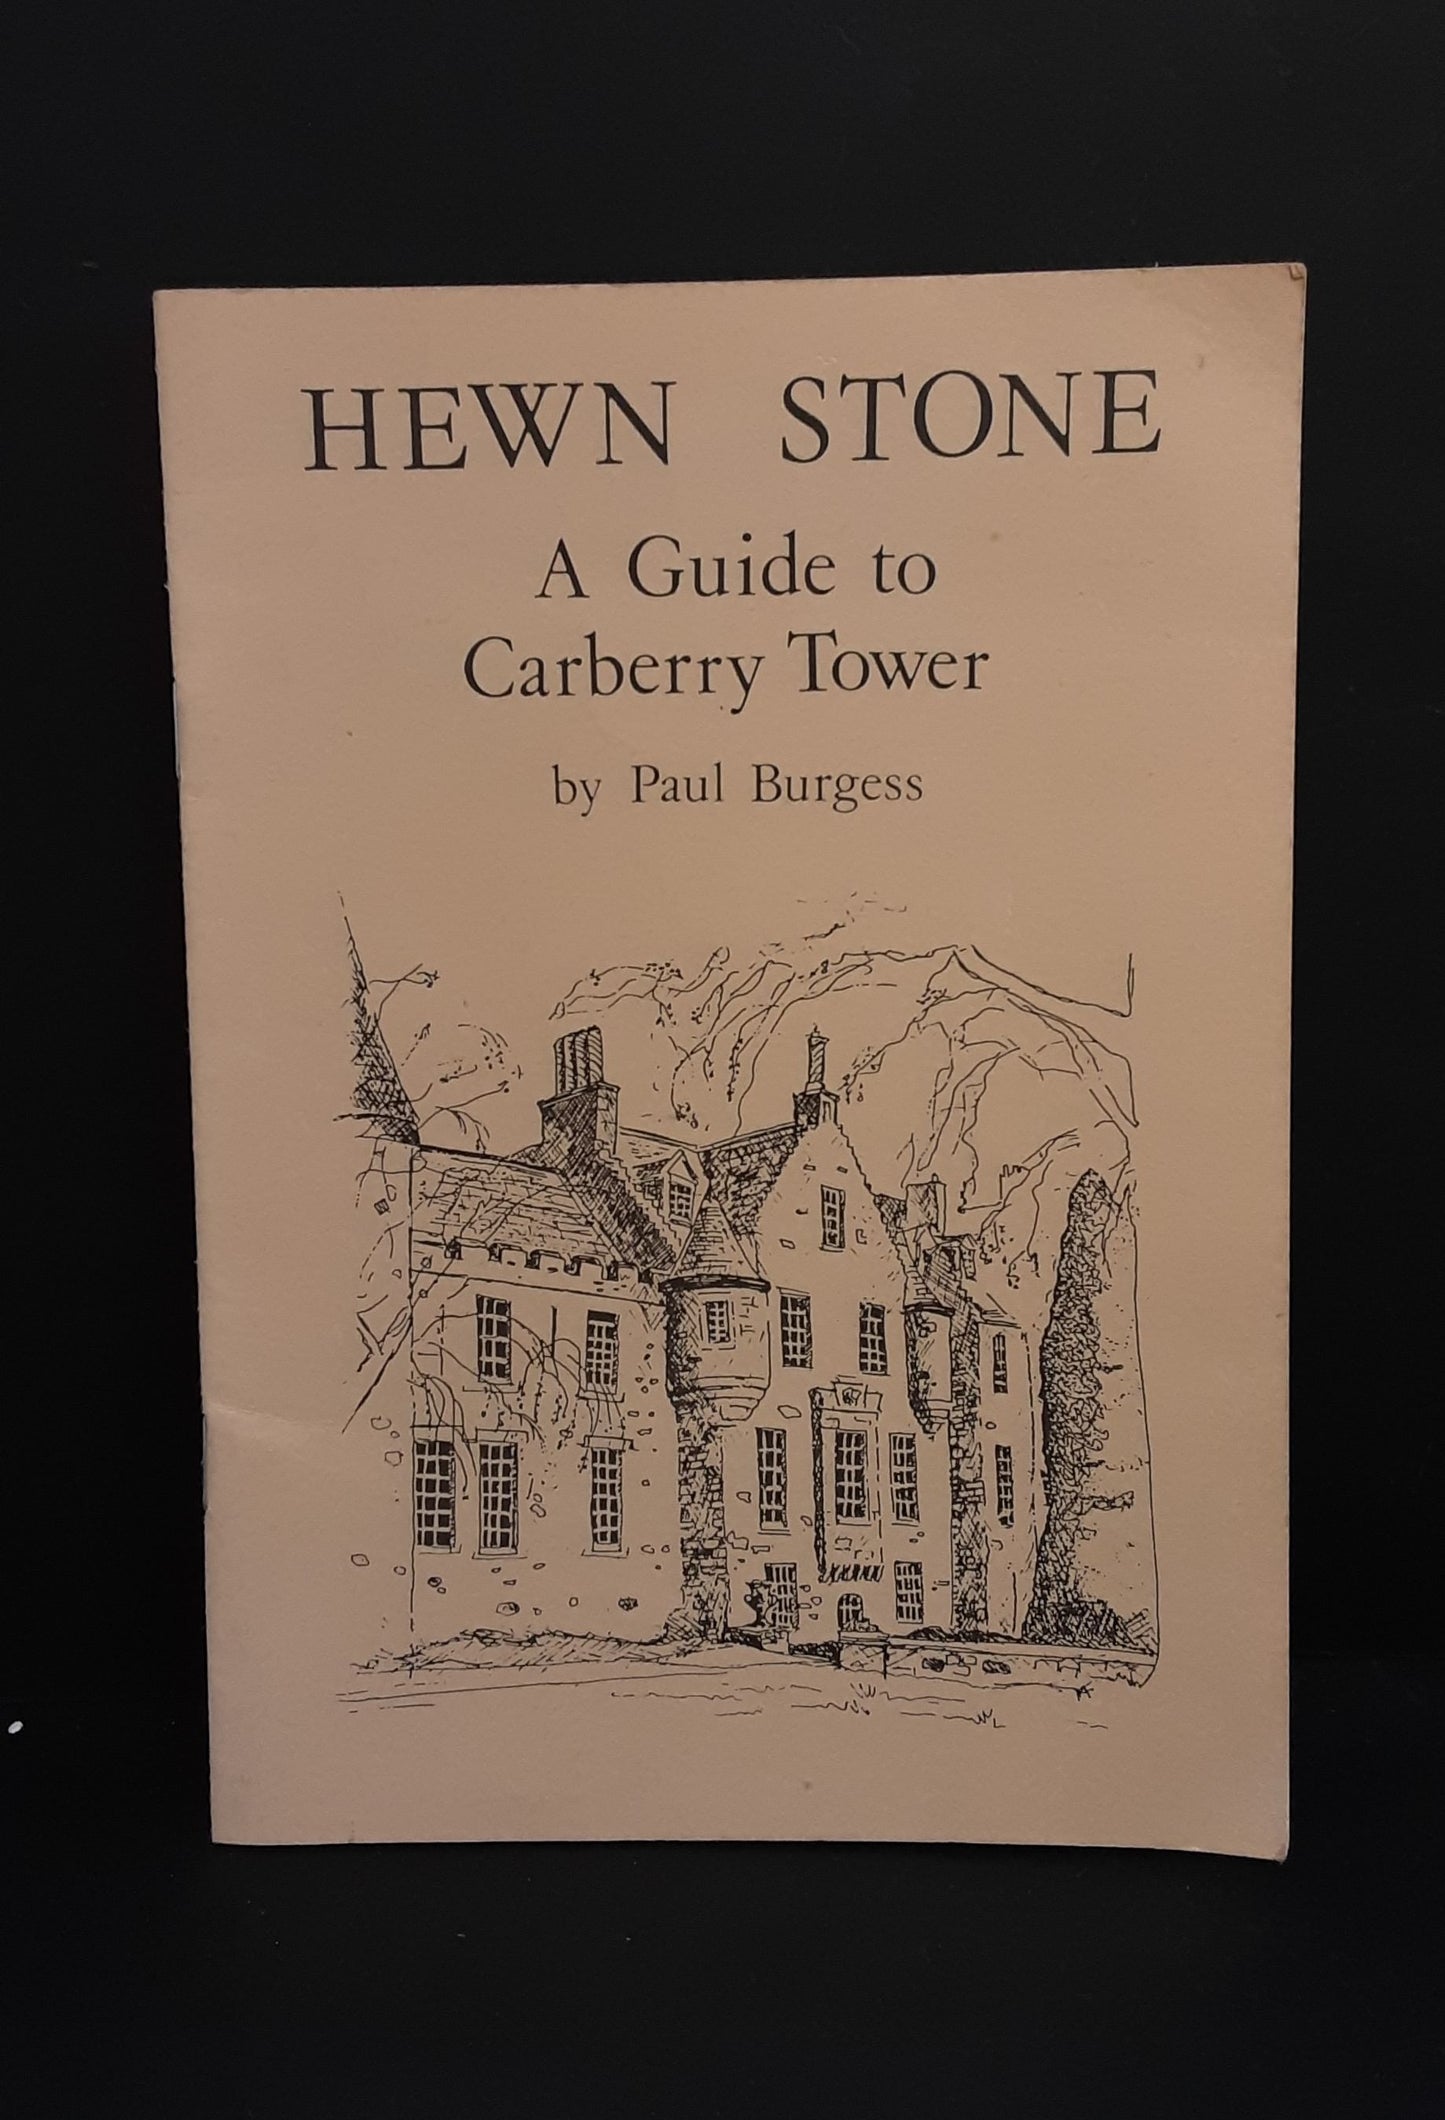 A Guide to Carberry Tower by Paul Burgess, The Handsel Press 1989